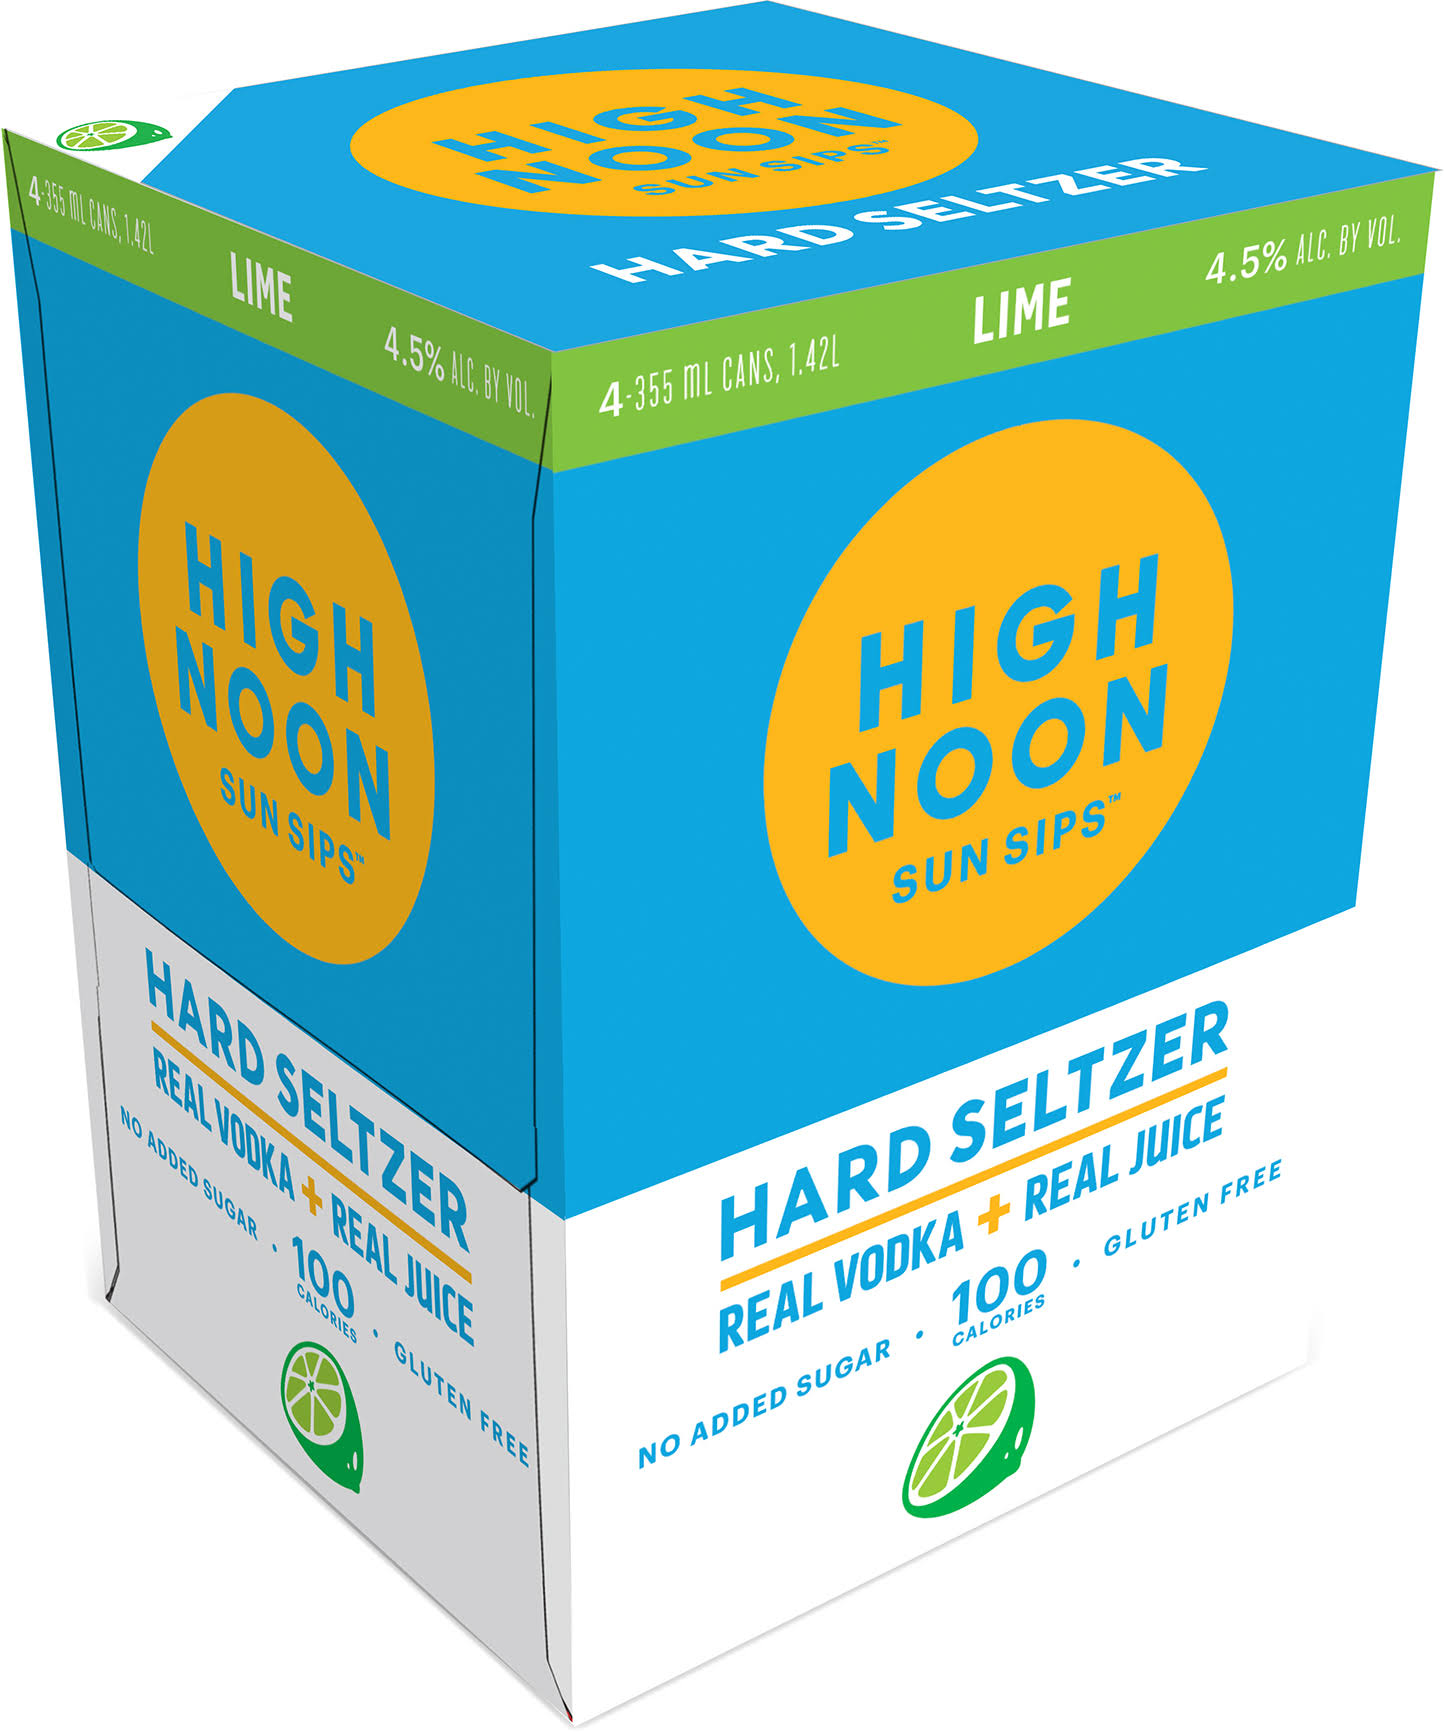 High Noon Sun Sips Hart Seltzer, Lime, 4 Pack - 4 pack, 355 ml cans